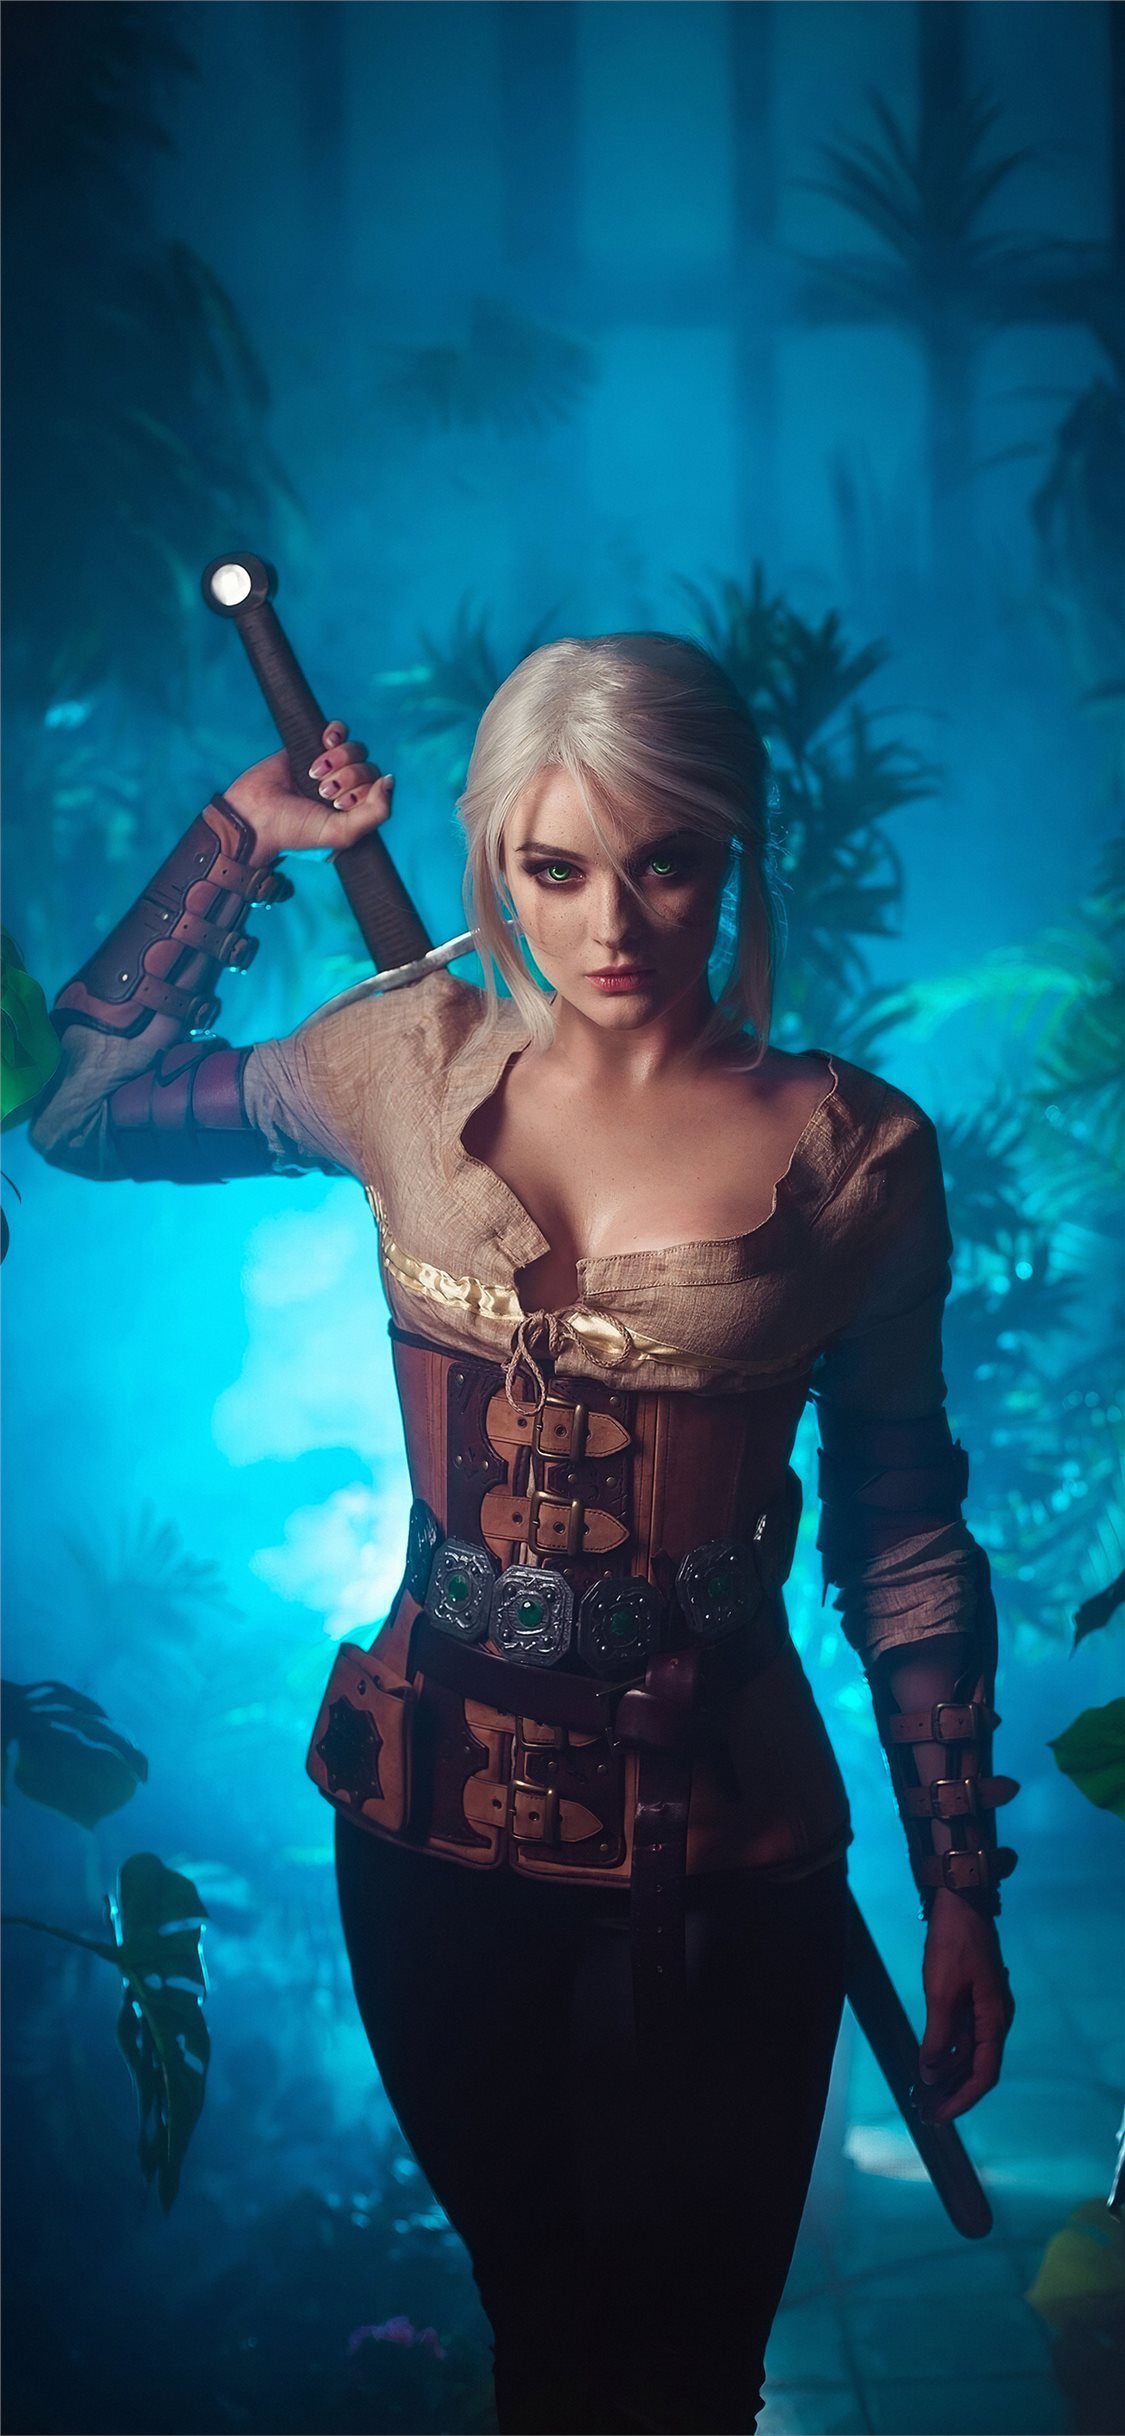 Best The Witcher 3 Iphone X Wallpapers Hd Ilikewallpaper